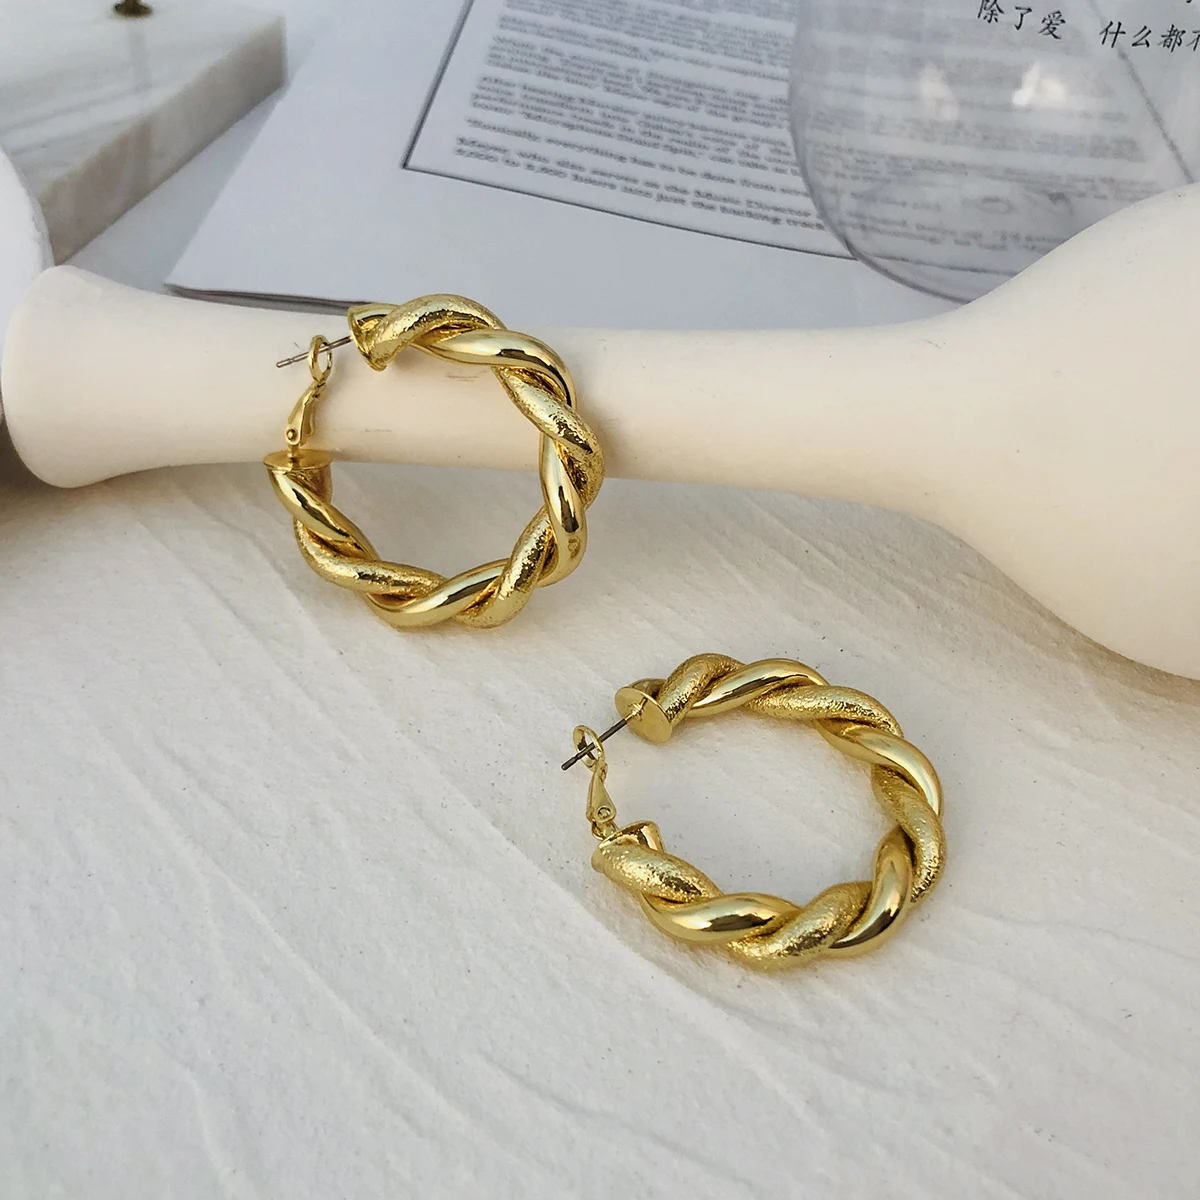 

AMORCOME Gold Thick Twisted Hoop Earrings Minimalist Huggie Brass Earrings Hoops Gifts for Women Statement Jewelry Brincos